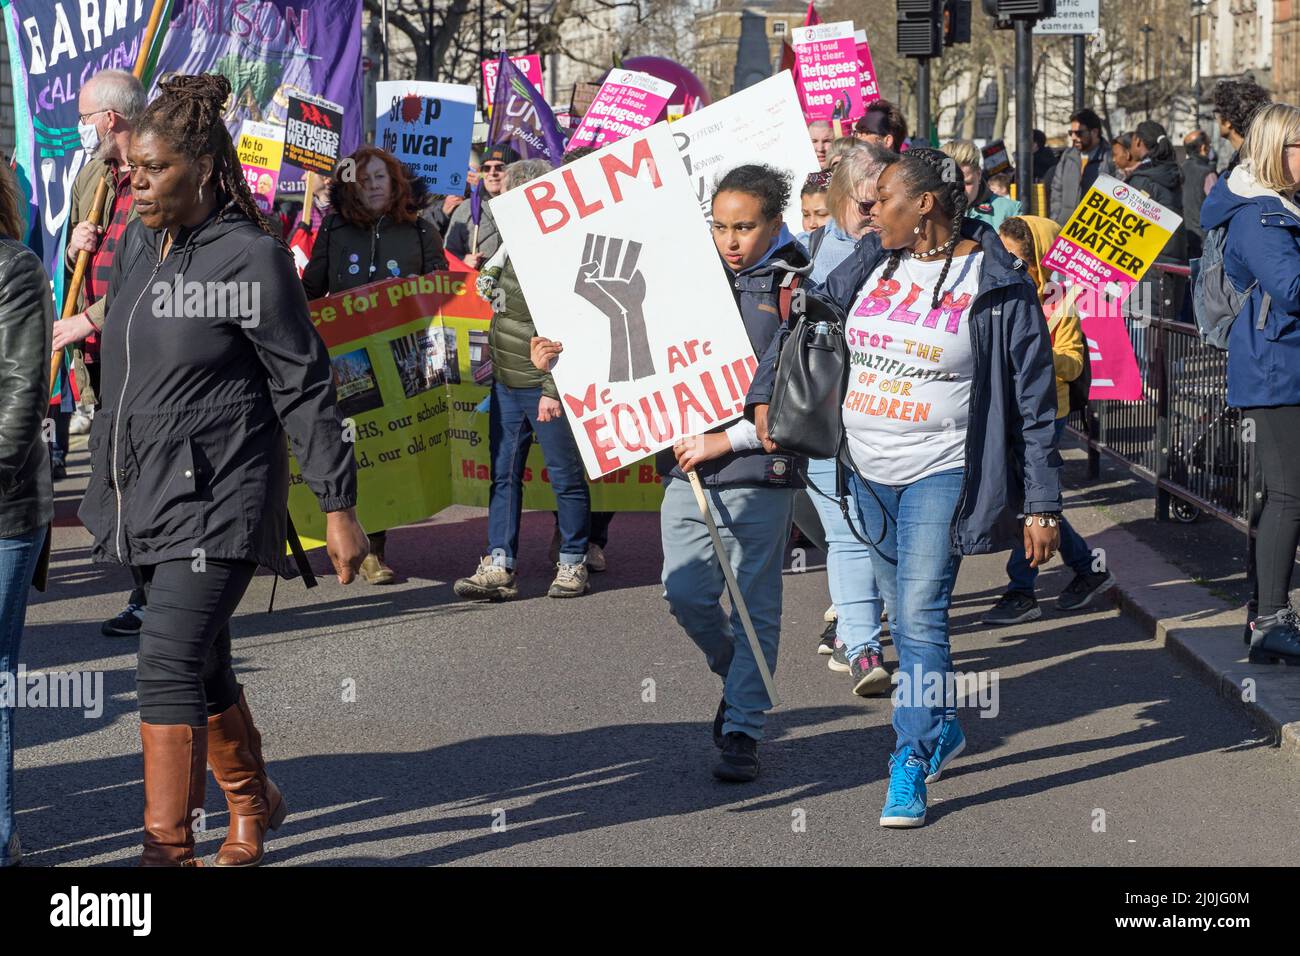 Anti Racism protest on the streets of London. Two females holding a black lives matter sign. London - 19th March 2022 Stock Photo